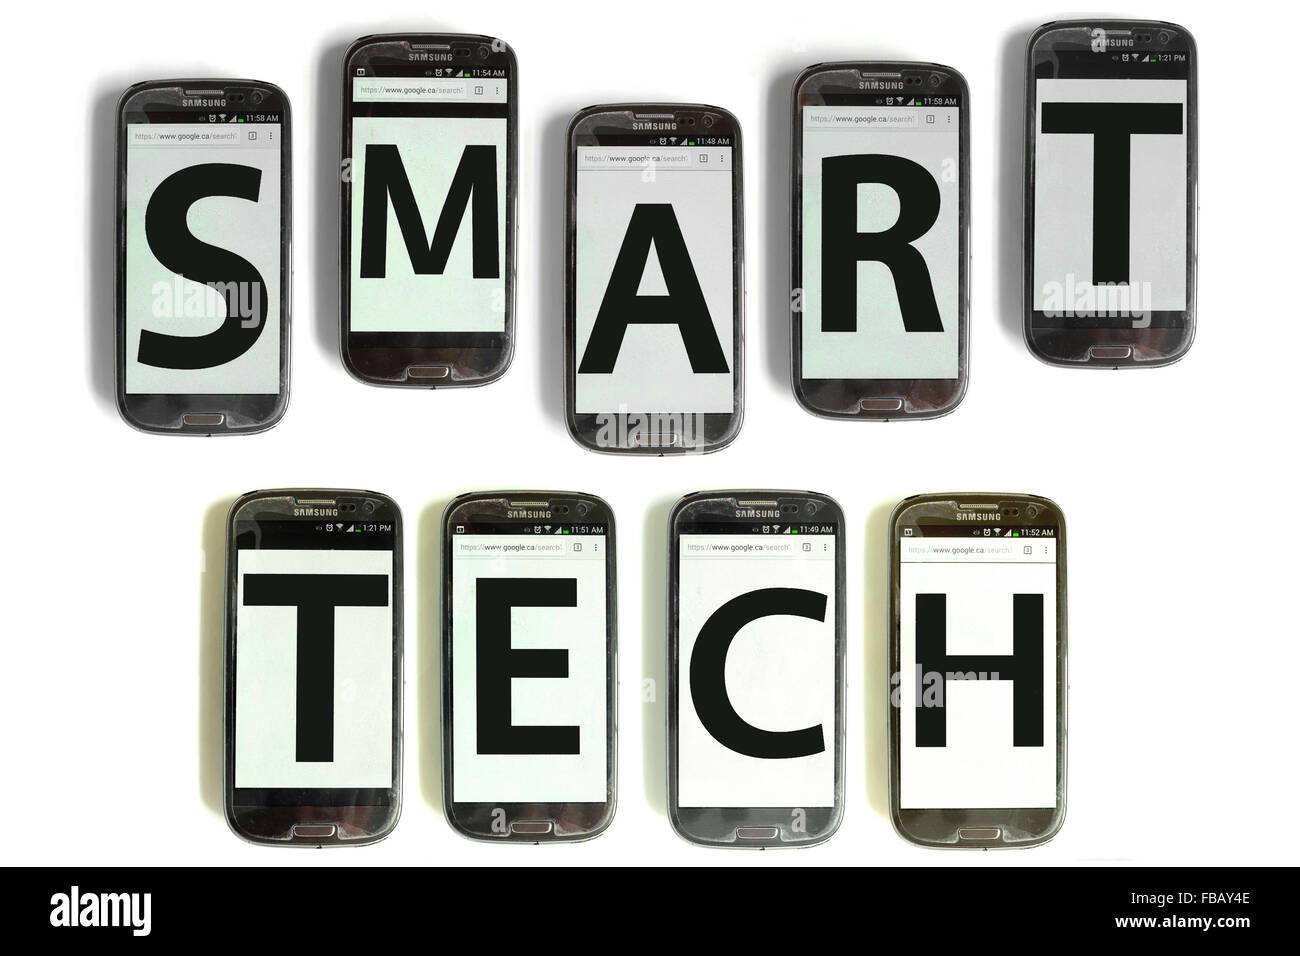 Smart Tech spelled out on mobile phone screens photographed against a white background. Stock Photo